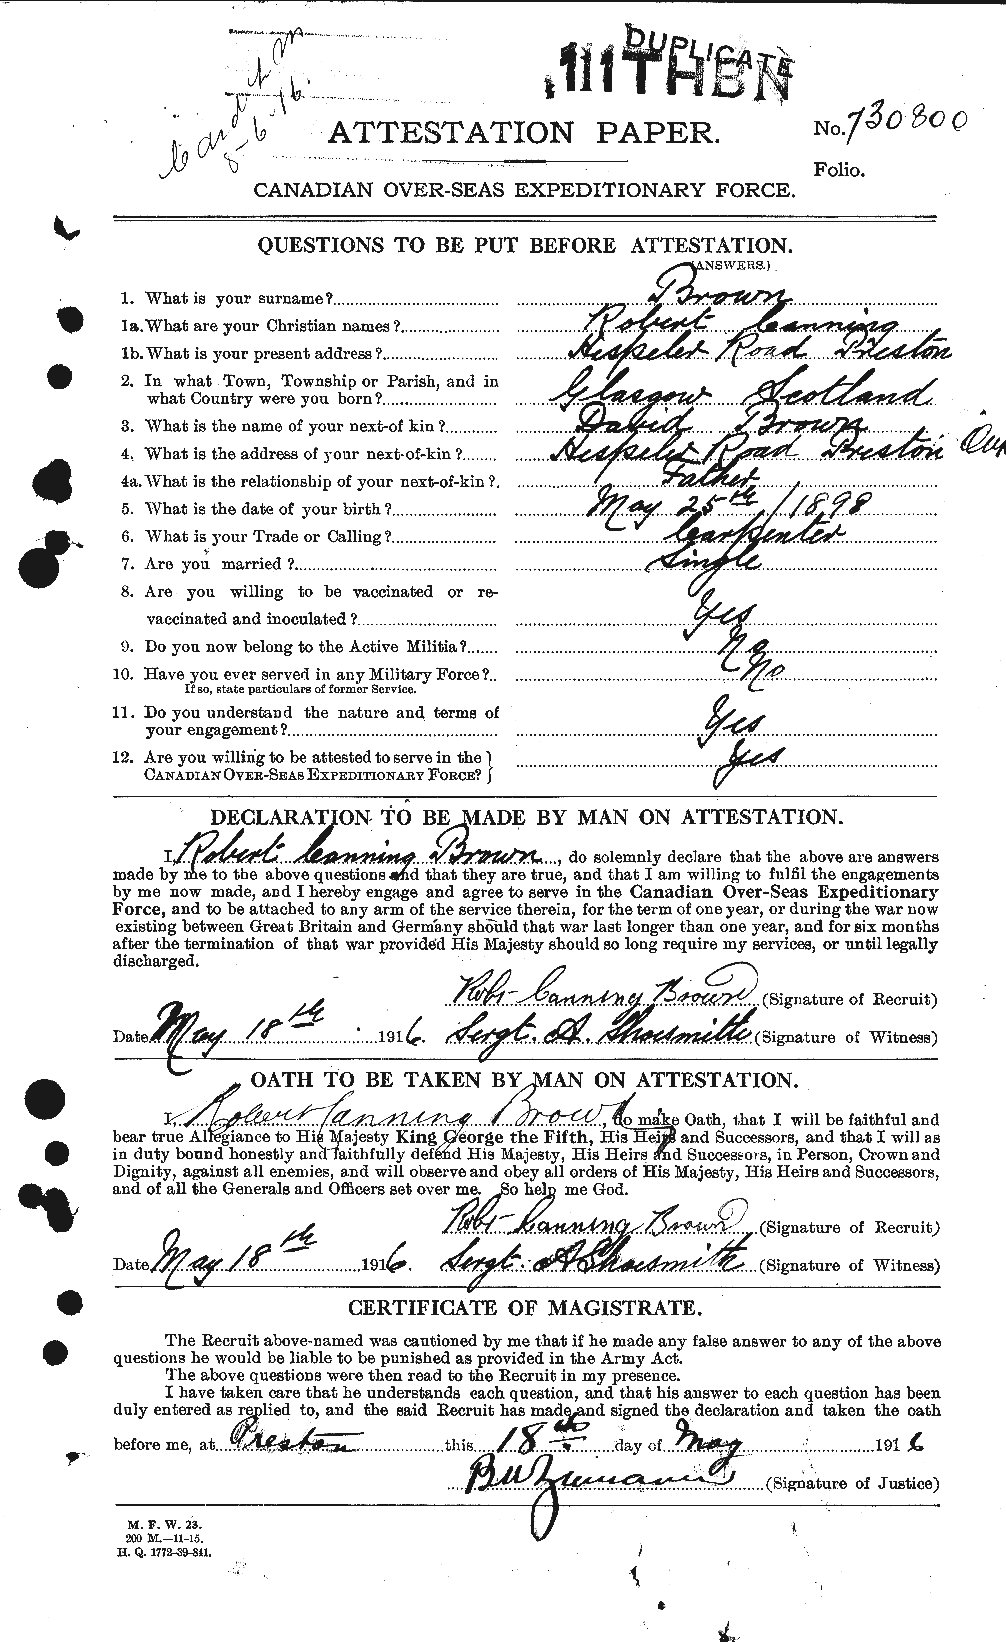 Personnel Records of the First World War - CEF 269902a